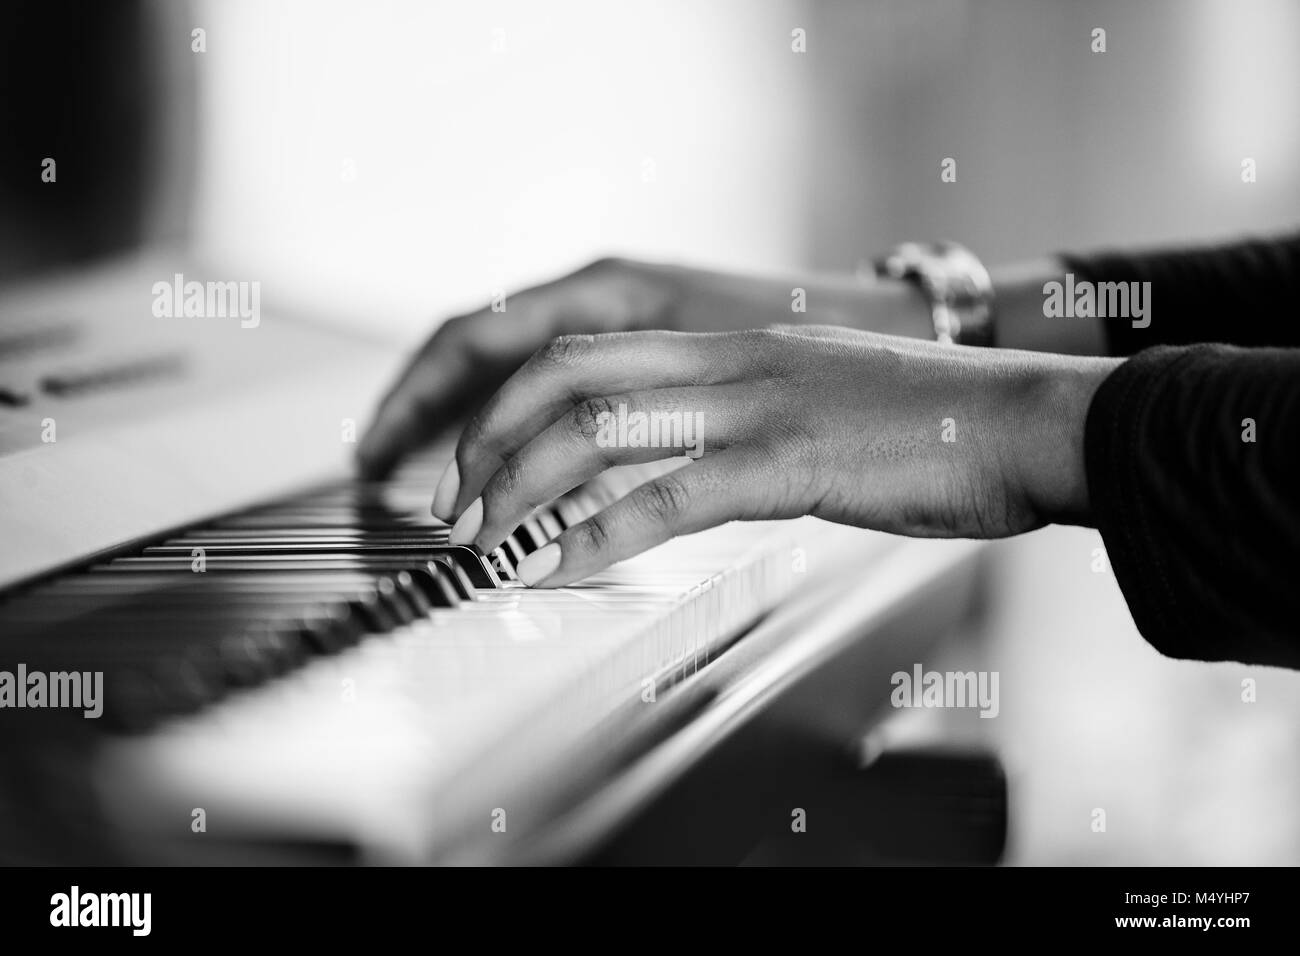 Female African hands playing a piano. Black and white image of pianists hands. Stock Photo